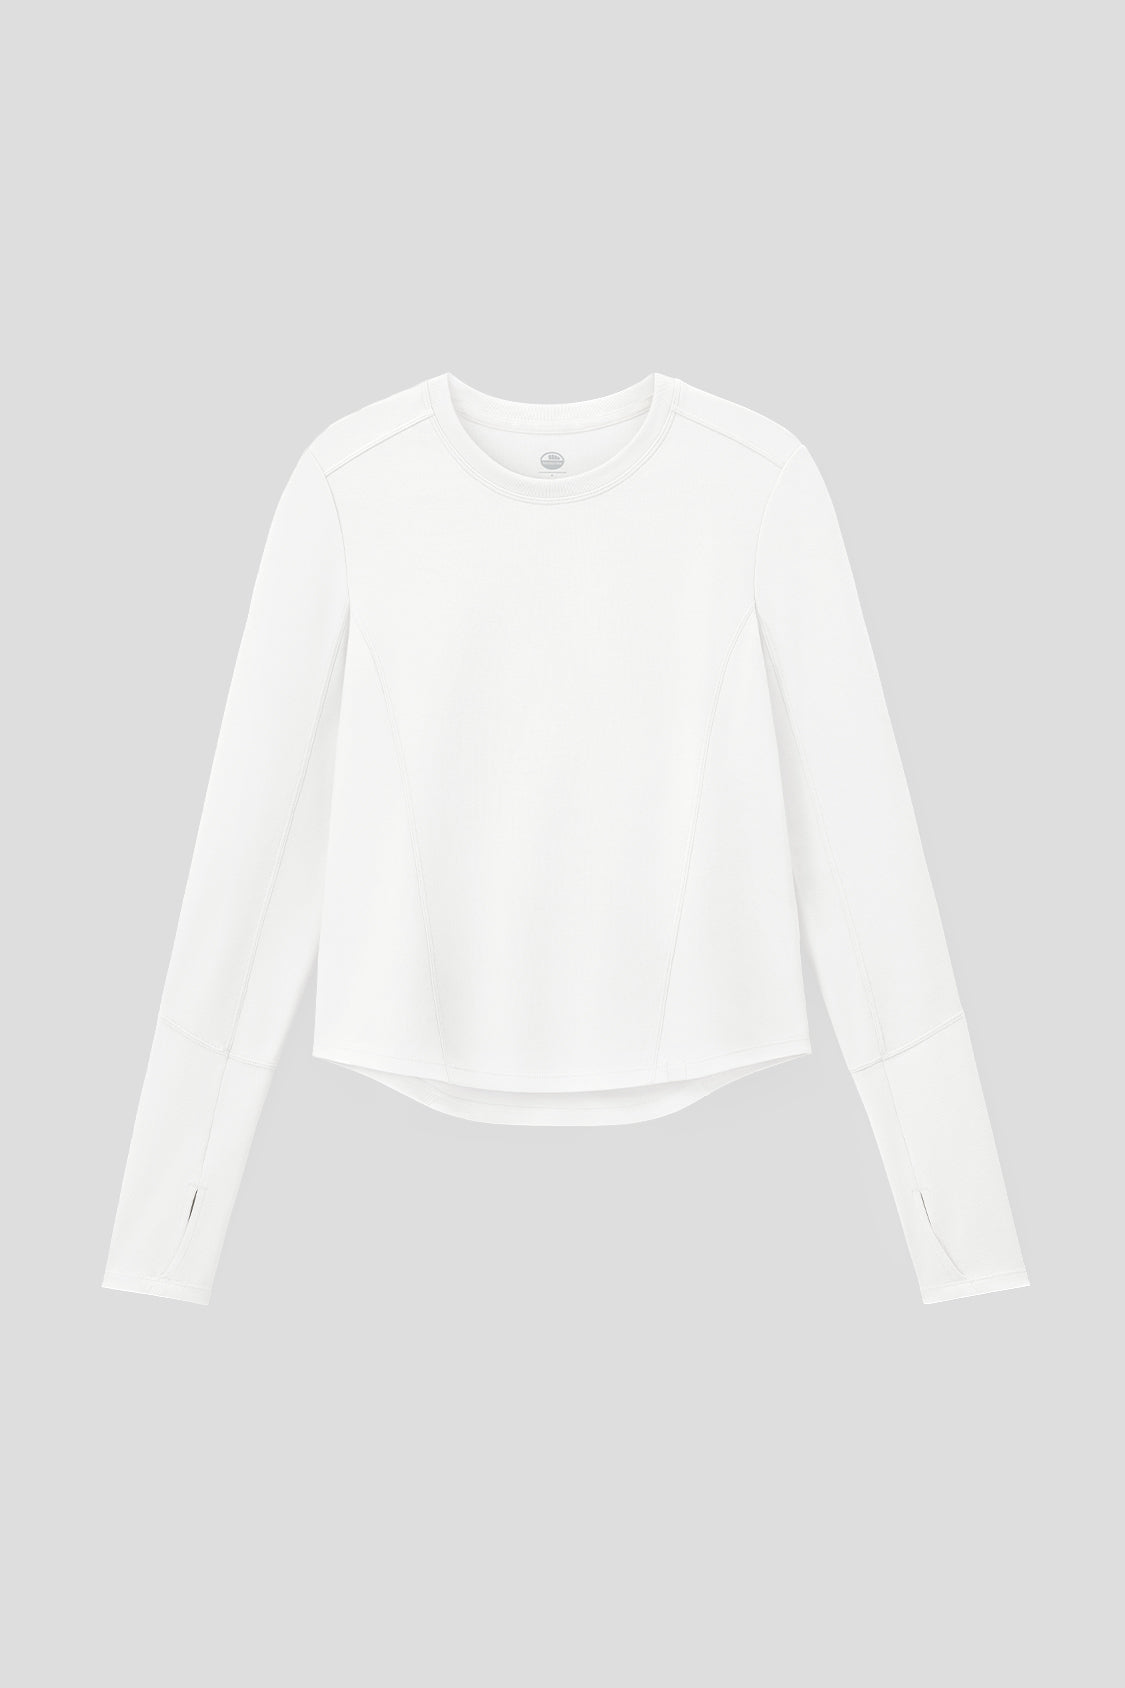 Women's Oversized Double Layer Elastic Cotton Long Sleeves